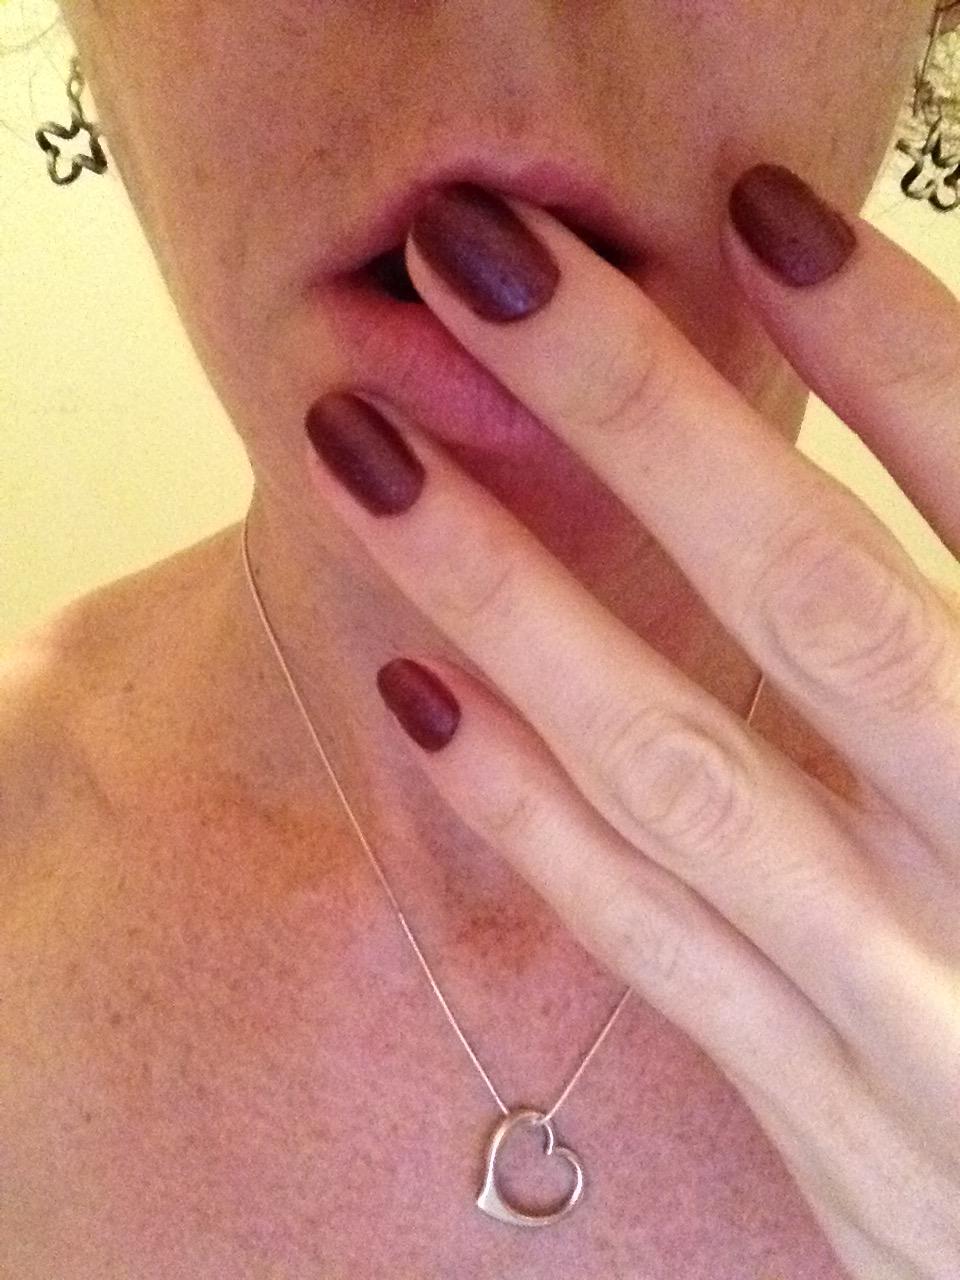 This polish colour is called naughty girl